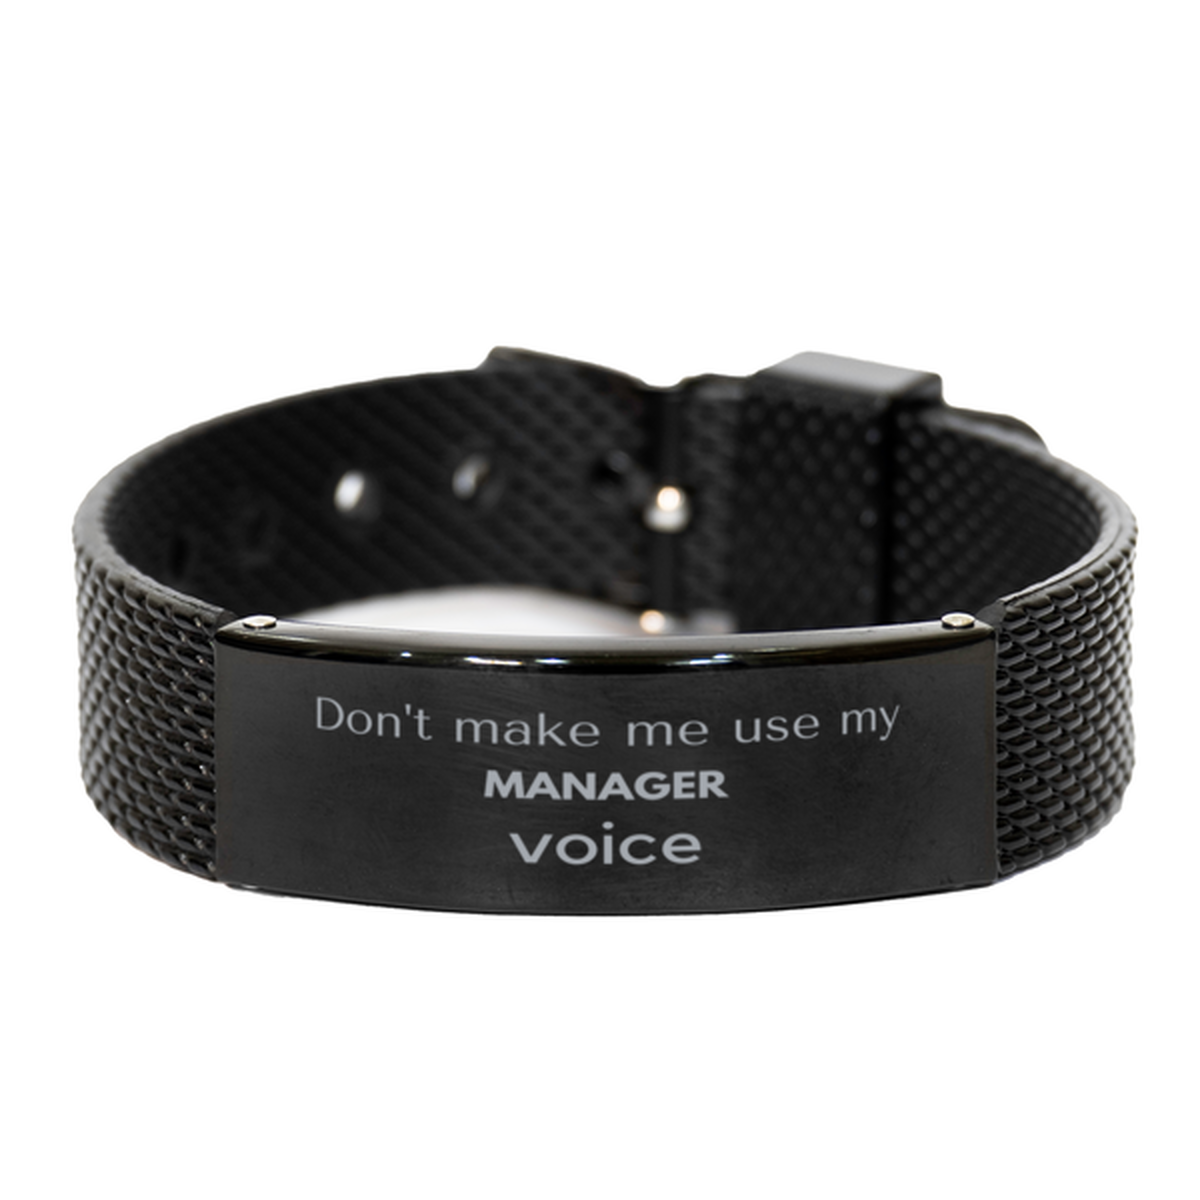 Don't make me use my Manager voice, Sarcasm Manager Gifts, Christmas Manager Black Shark Mesh Bracelet Birthday Unique Gifts For Manager Coworkers, Men, Women, Colleague, Friends